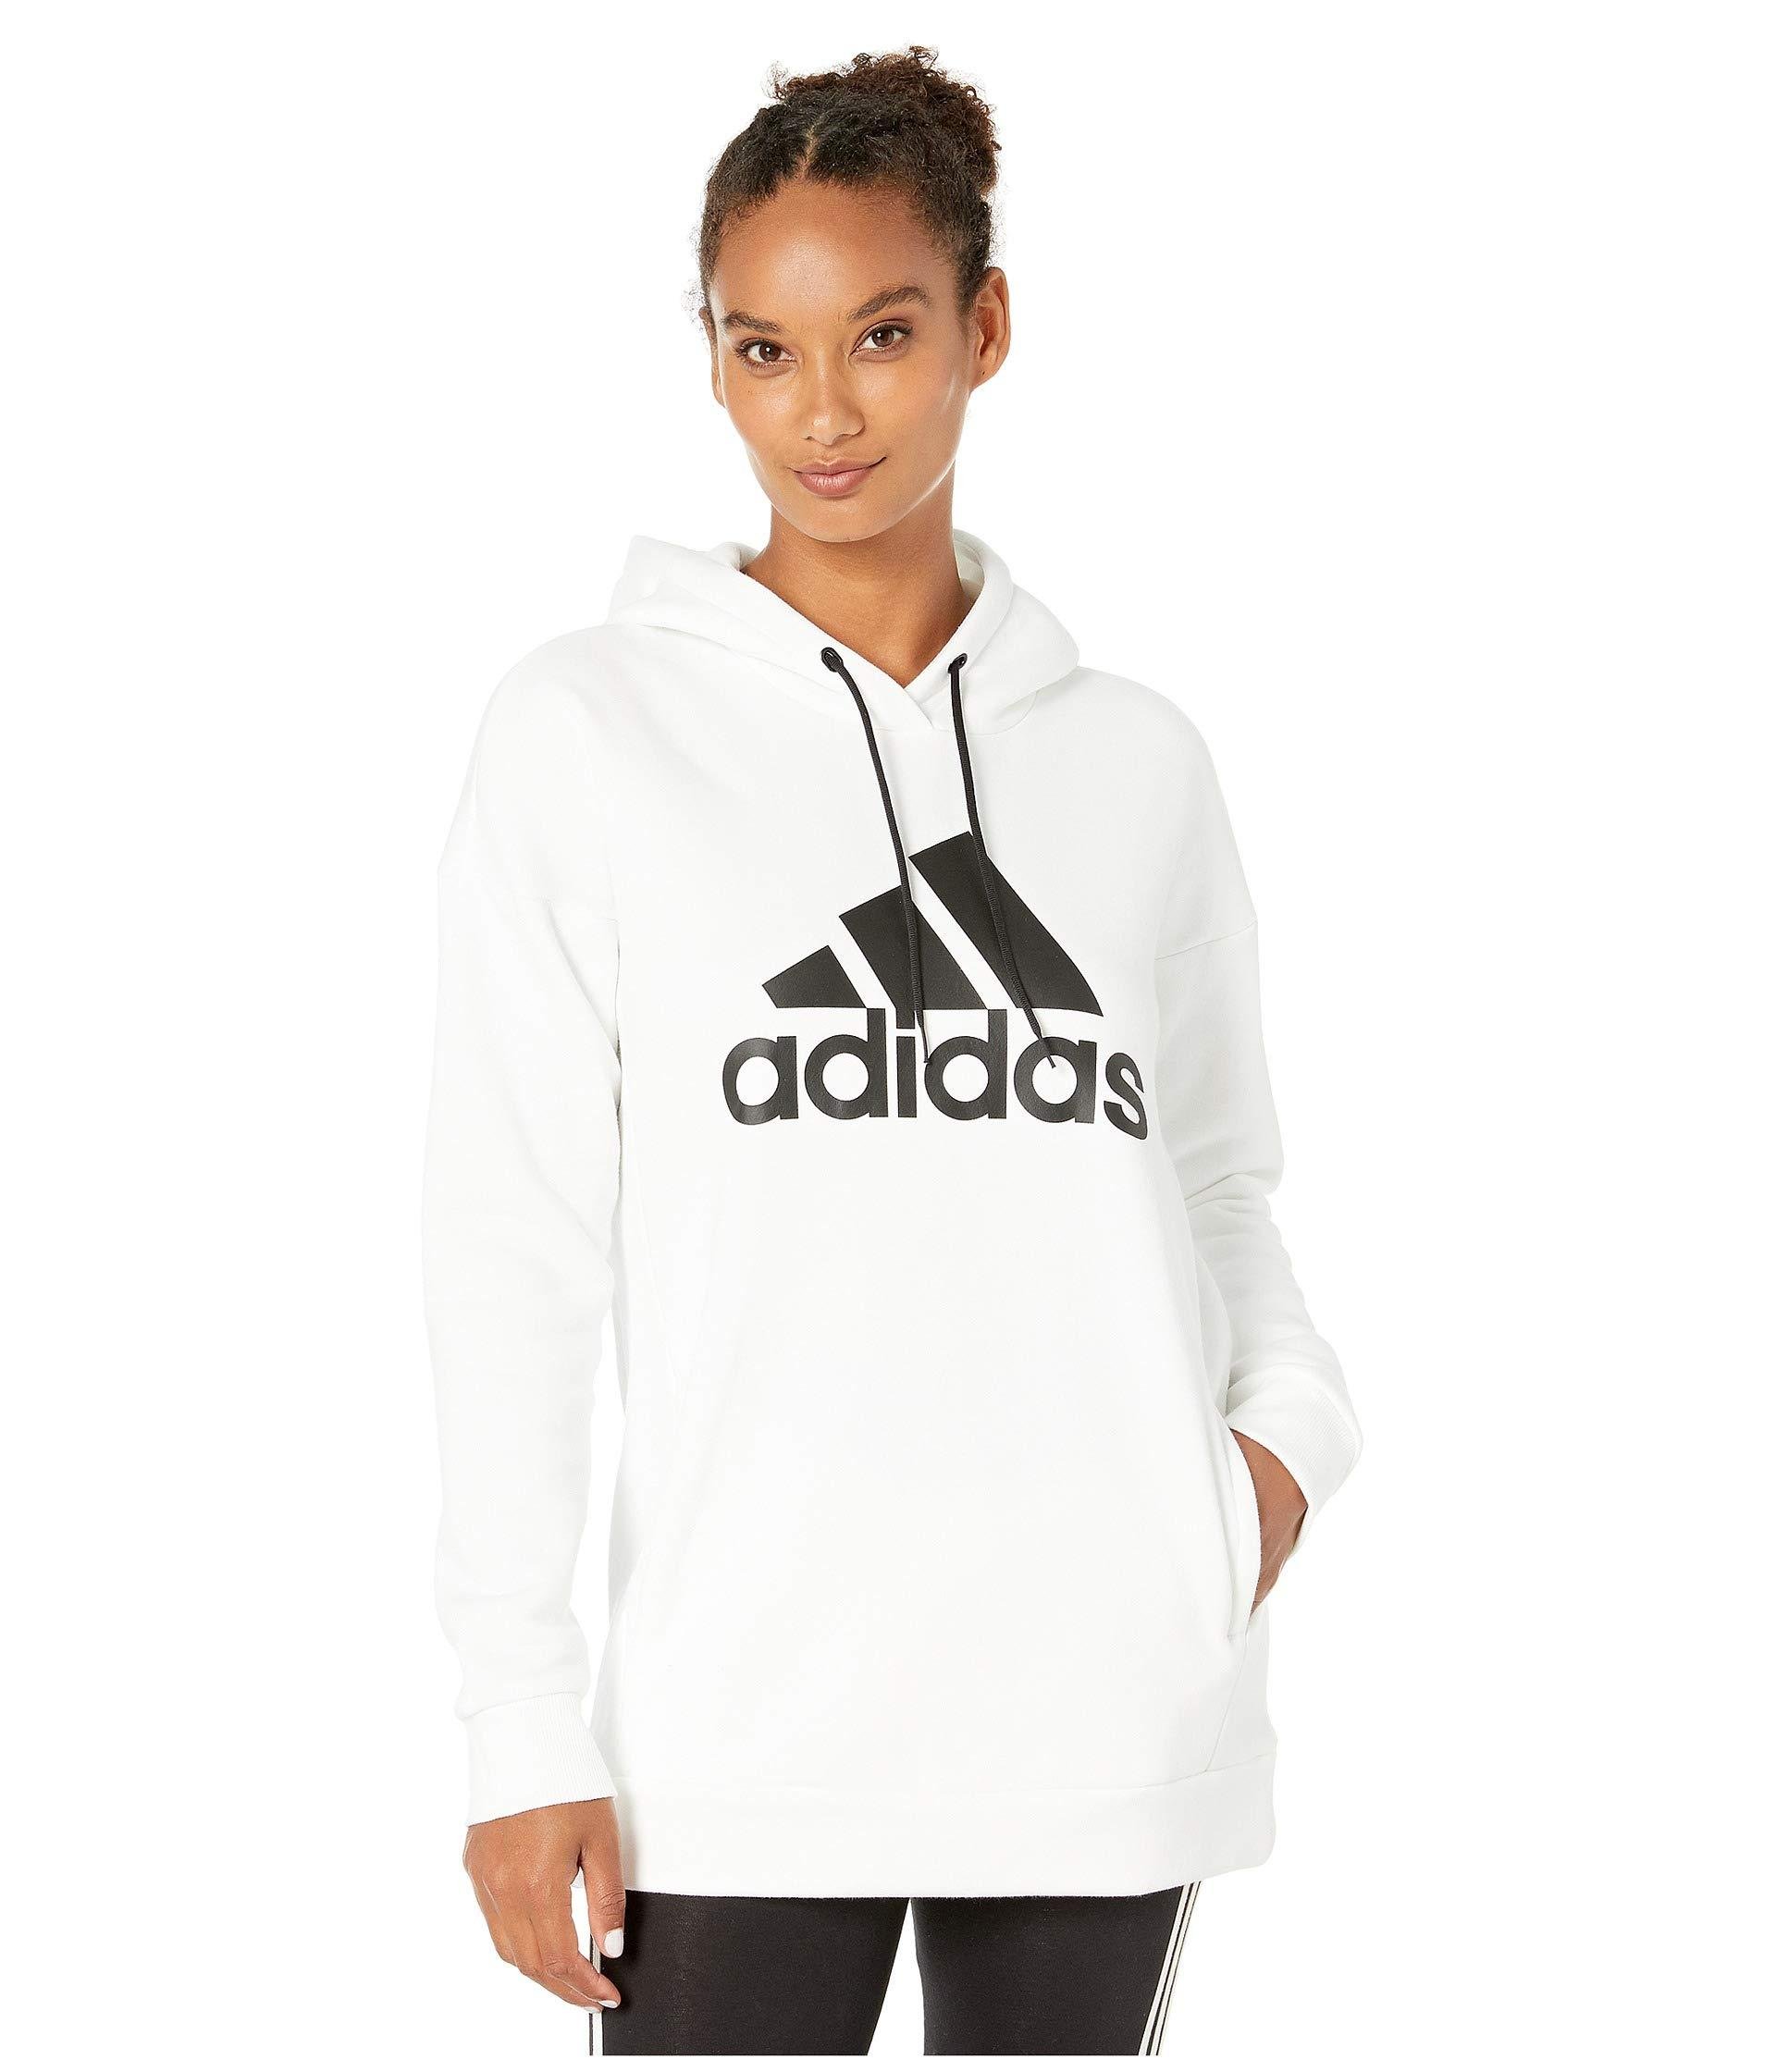 adidas Cotton Must Have Badge Of Sport Hoodie in White - Lyst